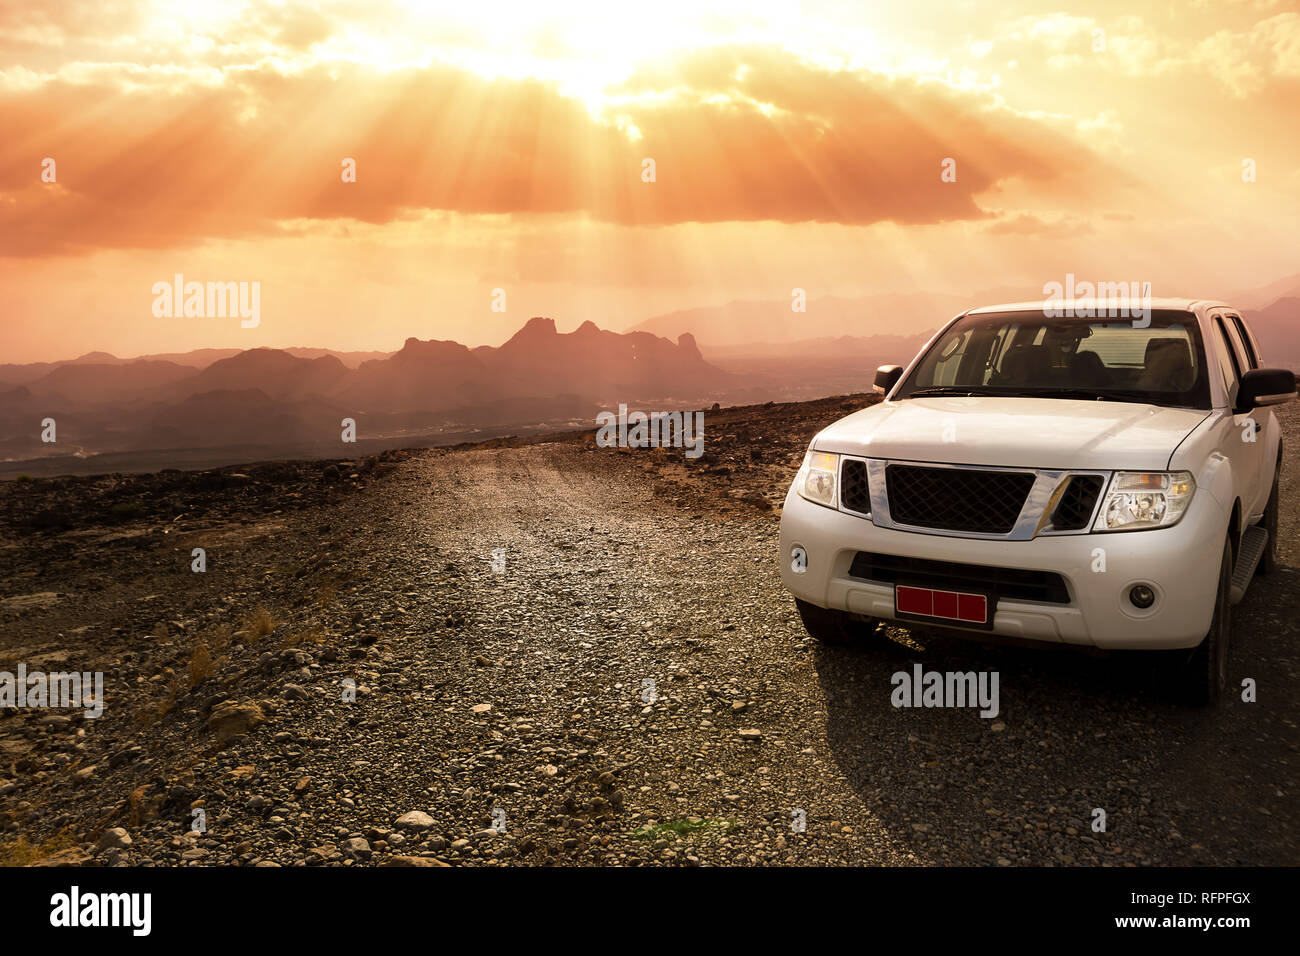 Off-road vehicle on the Jebel Shams mountains and cloudy sky with amazing sunrays Stock Photo